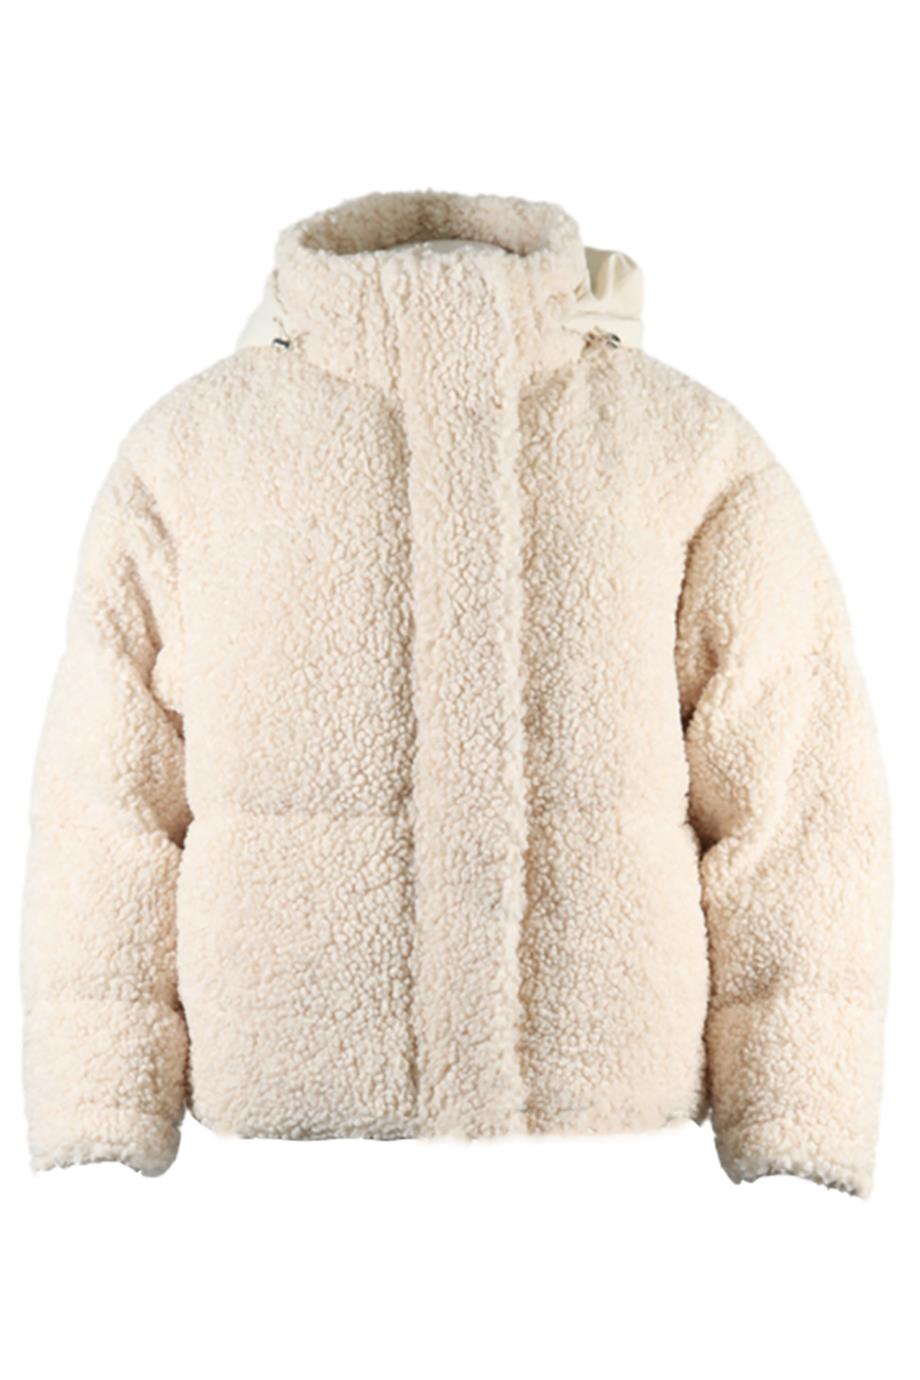 MAJE QUILTED PADDED FAUX SHEARLING JACKET UK 6